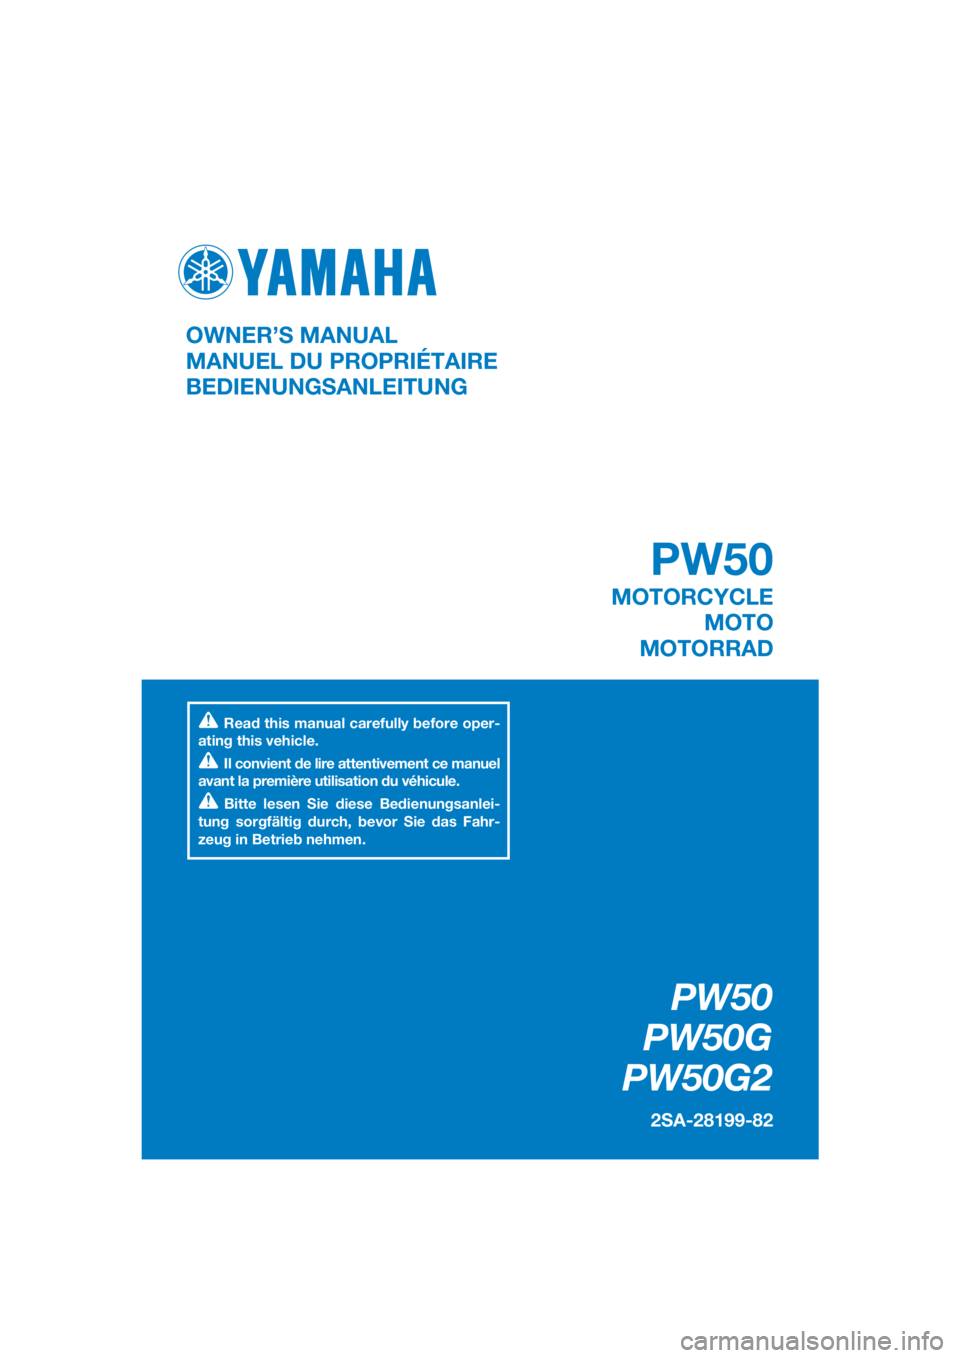 YAMAHA PW50 2016  Owners Manual DIC183
PW50
PW50G
PW50G2
2SA-28199-82
OWNER’S MANUAL
MANUEL DU PROPRIÉTAIRE
BEDIENUNGSANLEITUNG
Read this manual carefully before oper-
ating this vehicle.
Il convient de lire attentivement ce manu